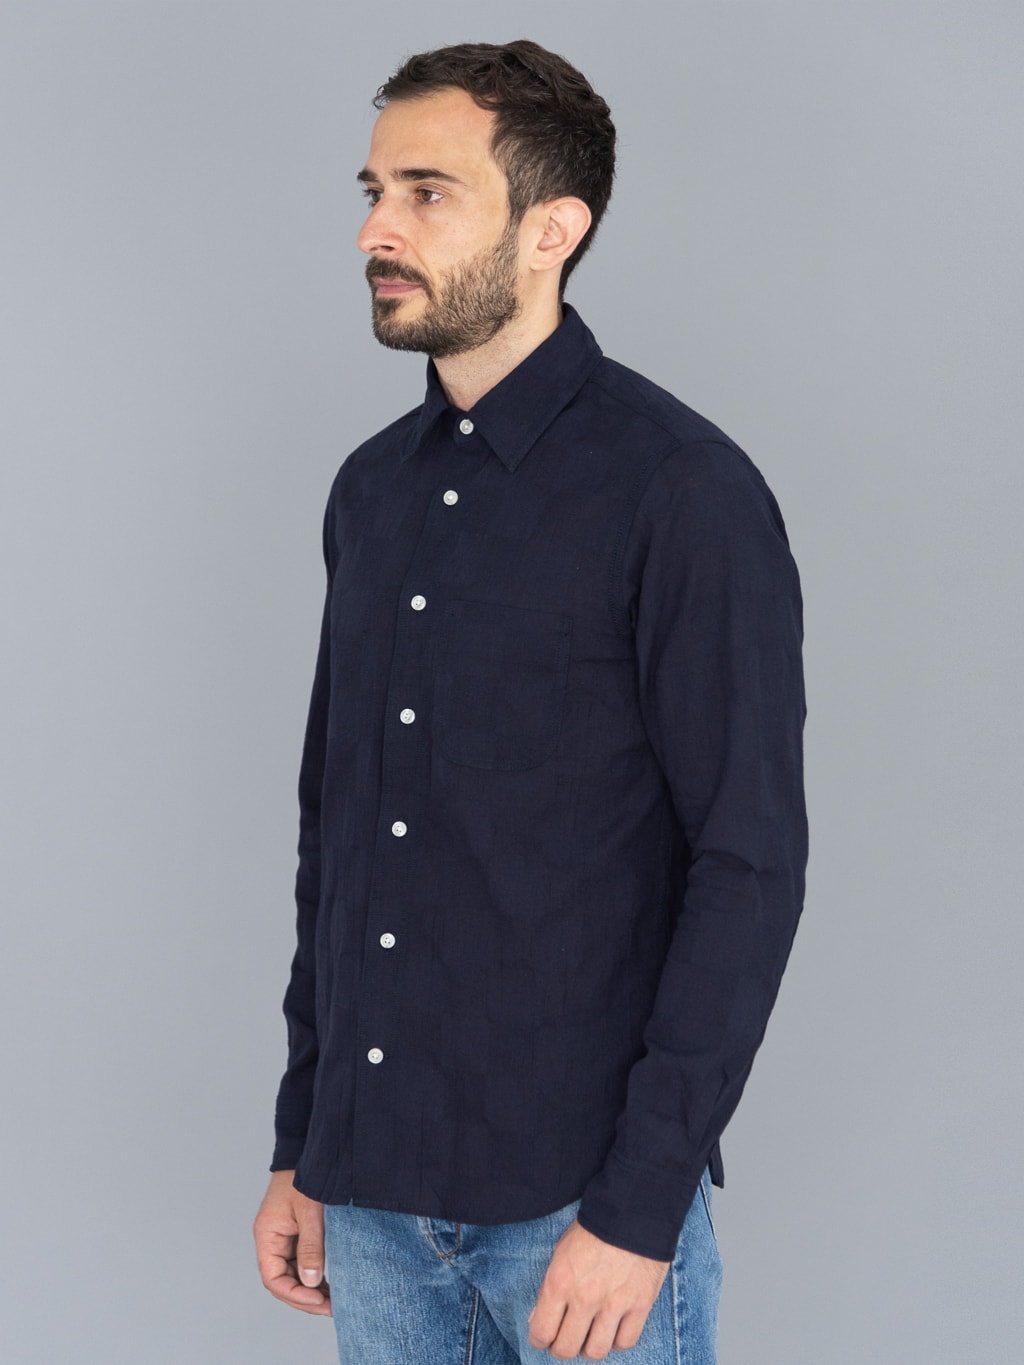 rogue territory jumper shirt navy checkered slim fit side